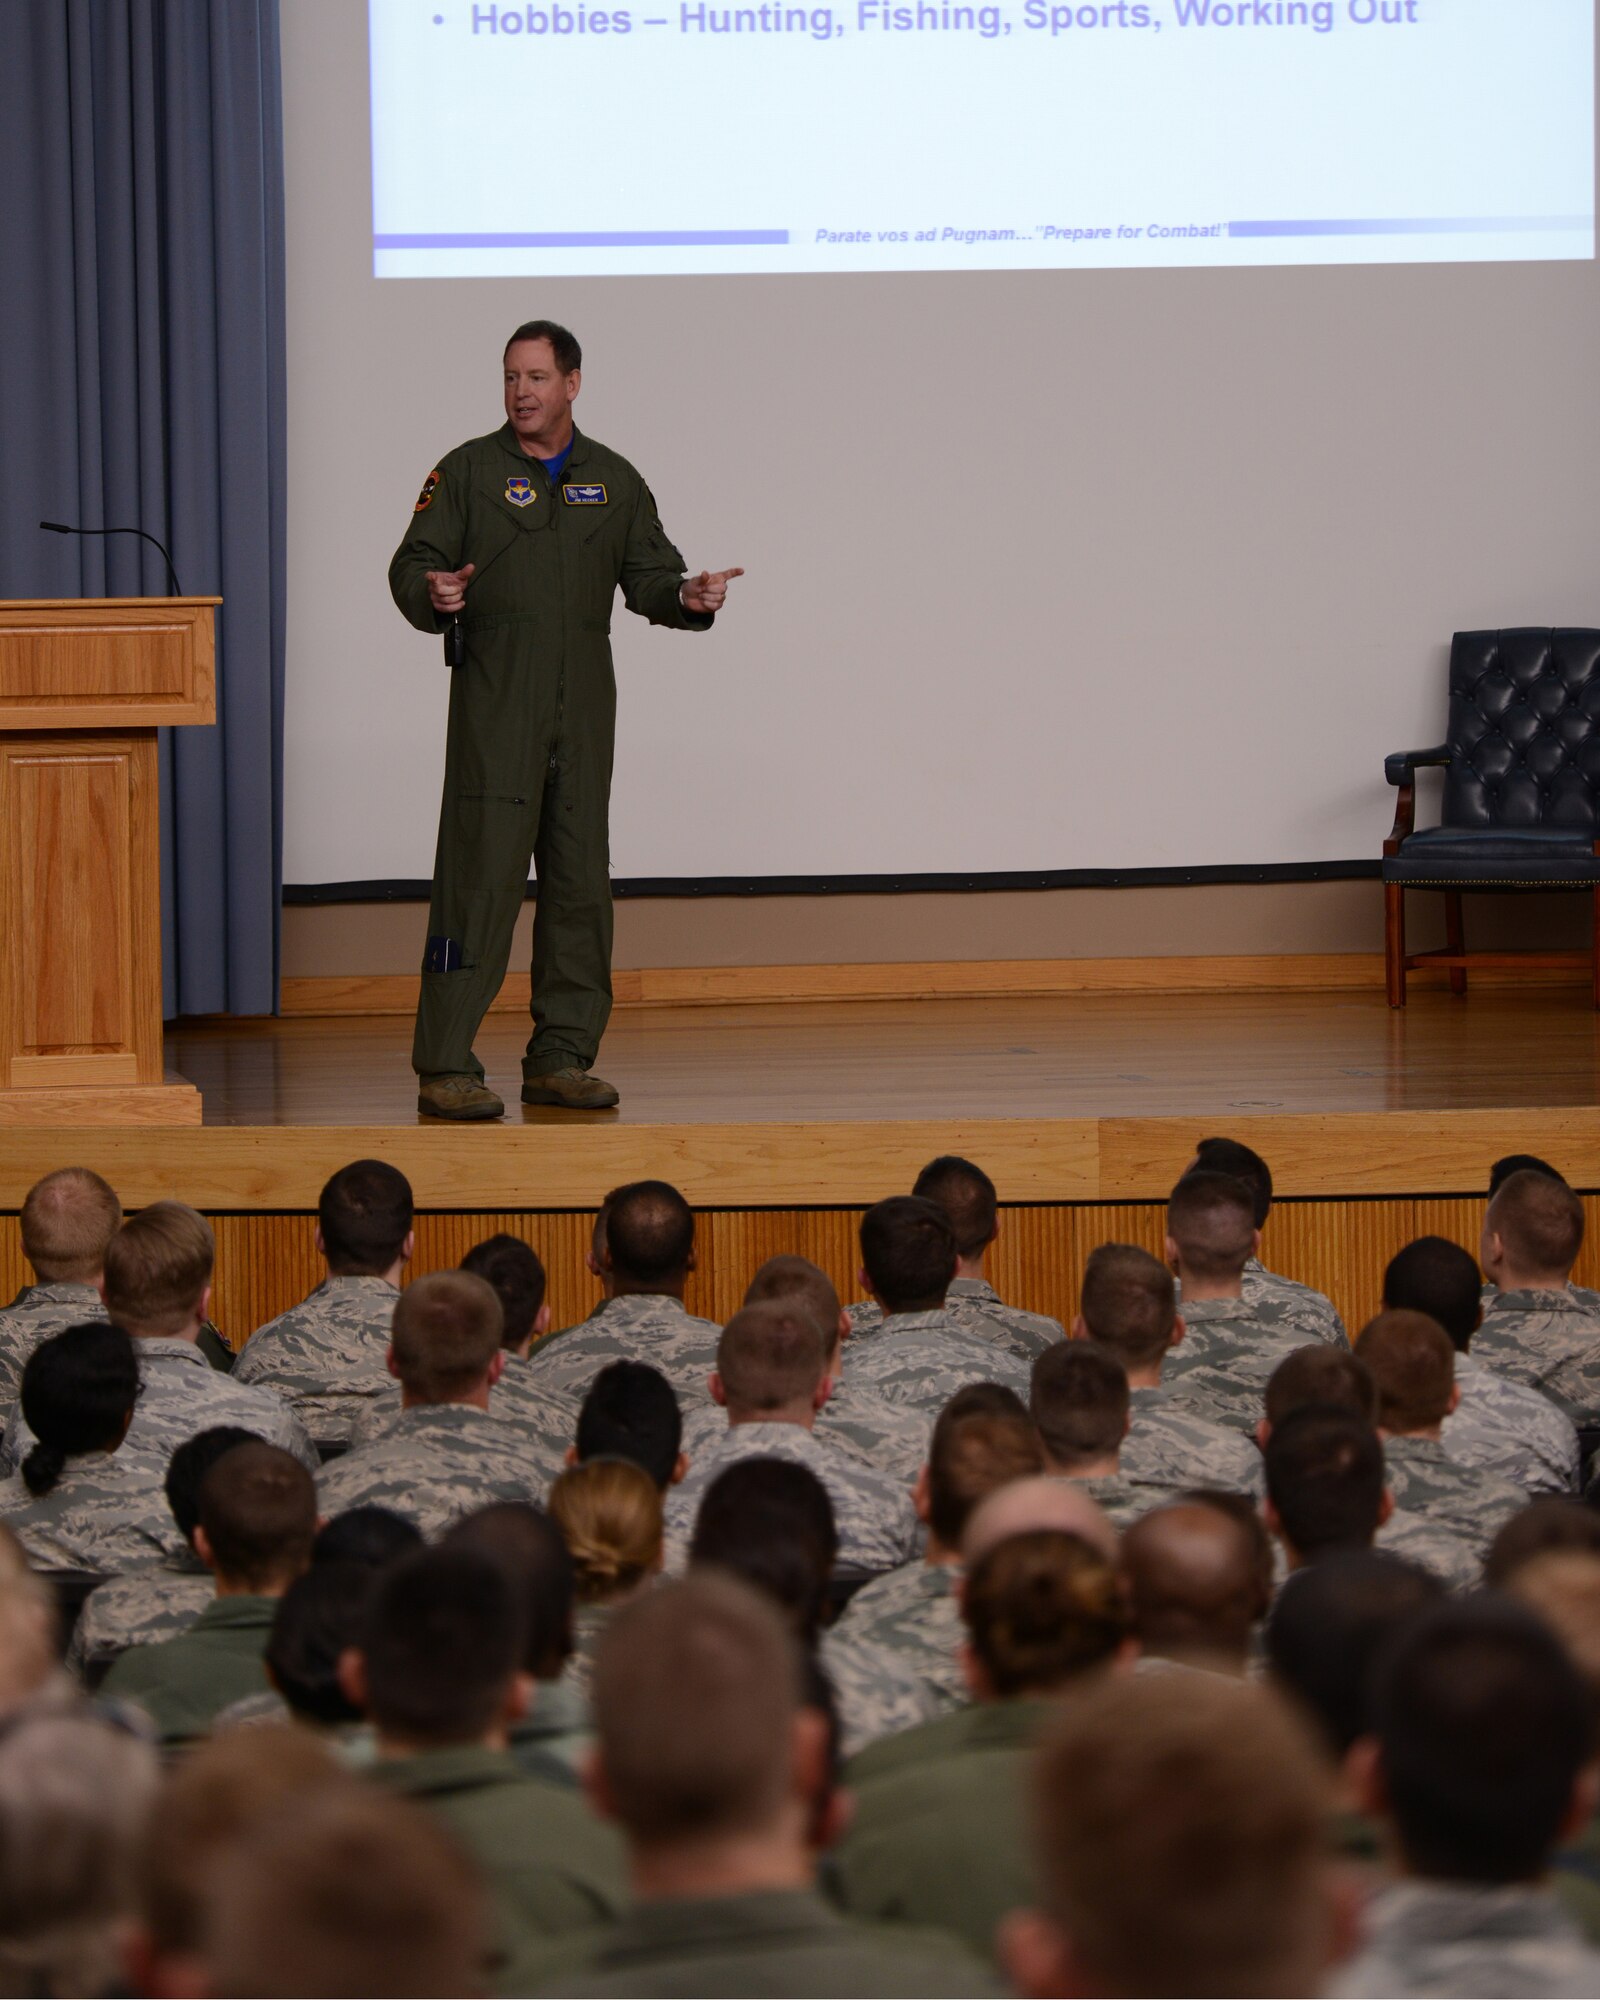 Maj. Gen. James Hecker, 19th Air Force commander, speaks at an all-call at Laughlin Air Force Base, Texas, Dec. 4, 2015. During the all-call, Hecker spoke to Laughlin Airmen about the importance of family, professionalism, and Comprehensive Airmen Fitness. (U.S. Air Force photo by Senior Airman Jimmie D. Pike)